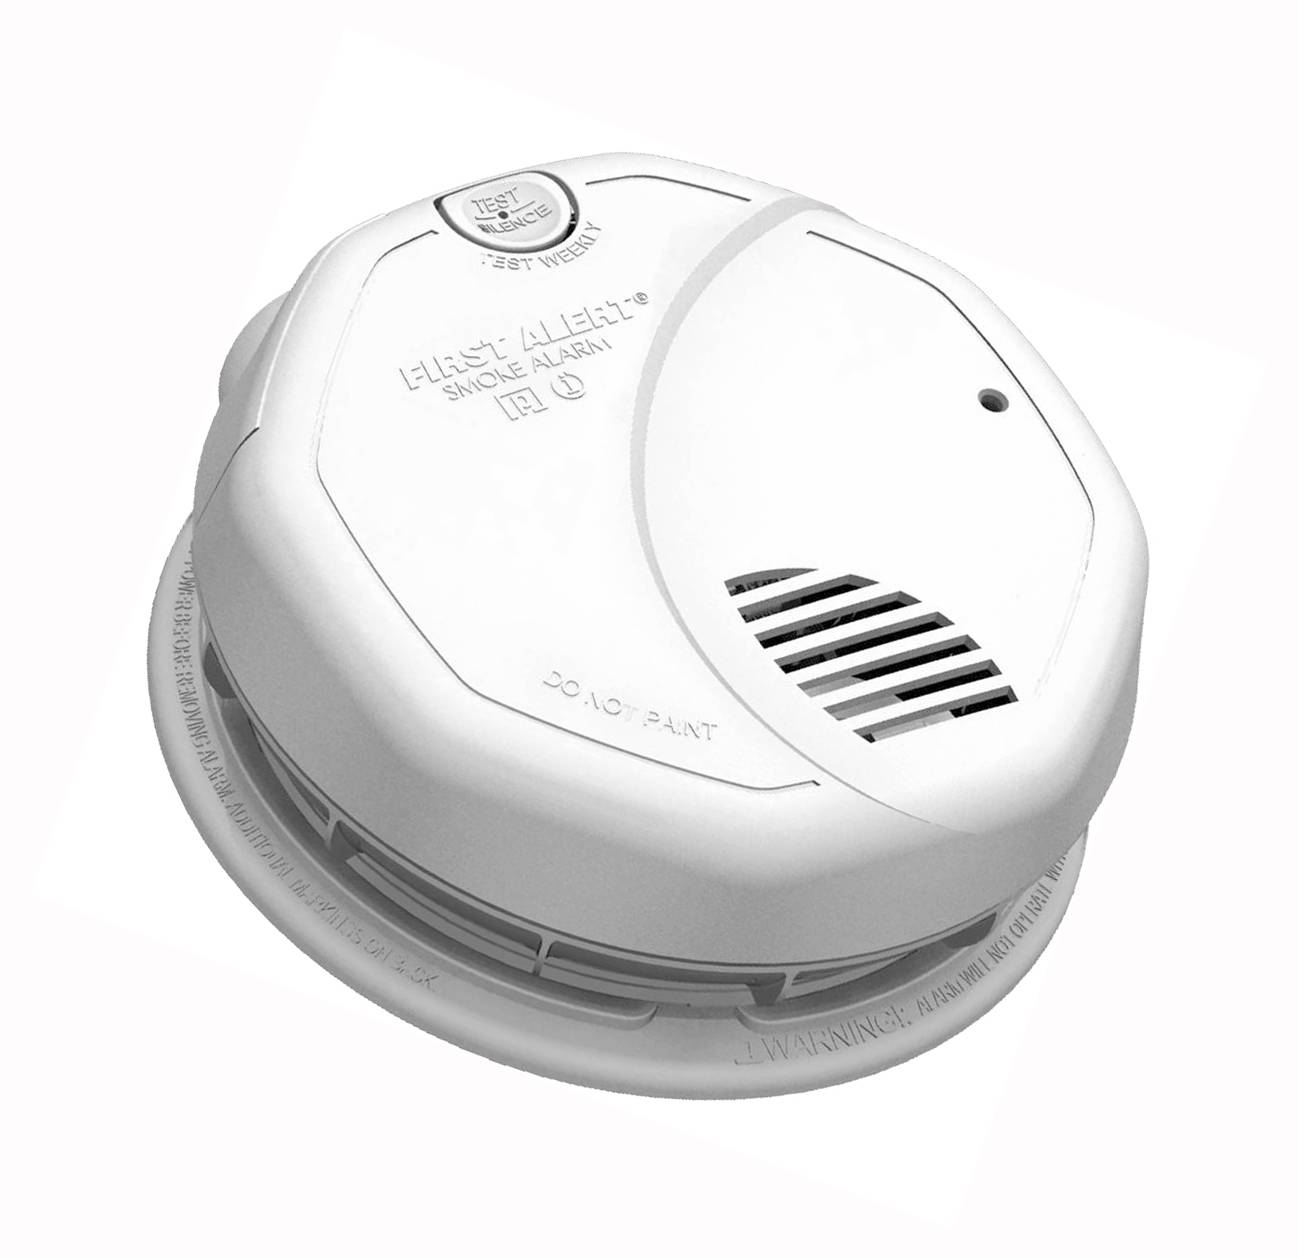 BRK® 3120B Wire-In Smoke Alarm, Ionization/Photoelectric Sensor, 120 VAC 60 Hz with (2) 1.5 VDC AA Batteries, LED Display, 85 dB